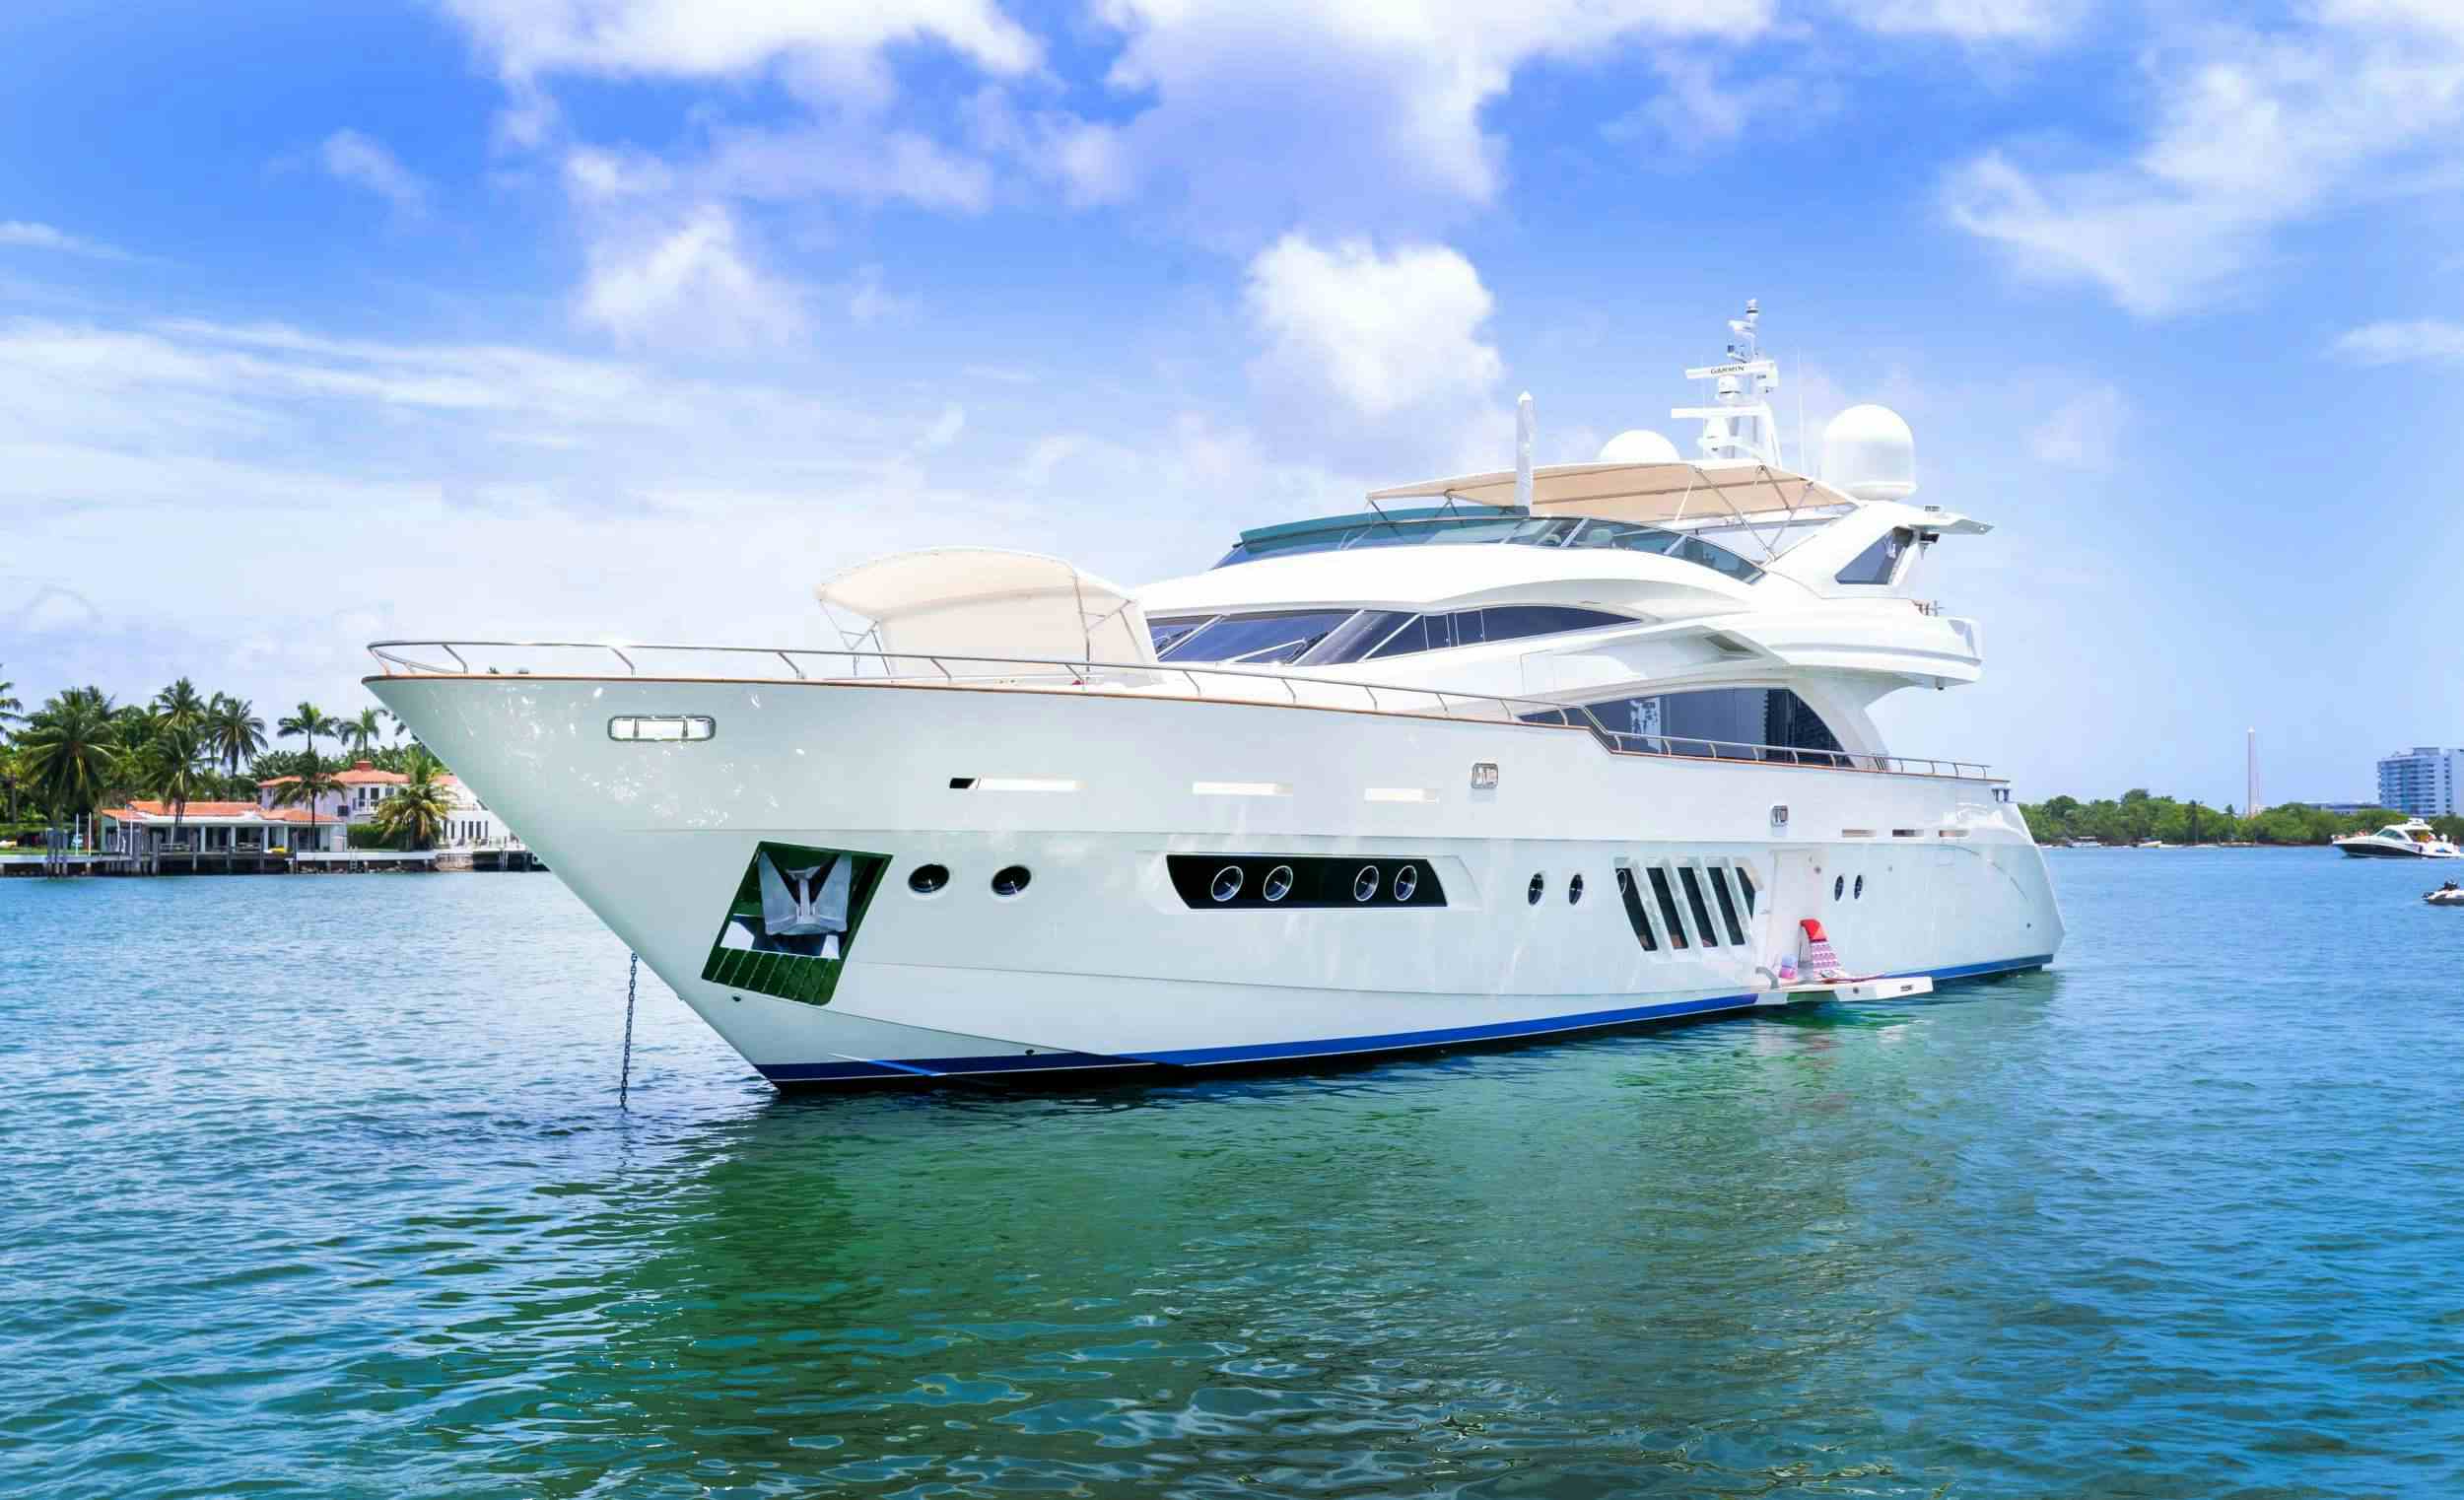 95 DOMINATOR - Yacht Charter Fort Lauderdale & Boat hire in US East Coast & Bahamas 1